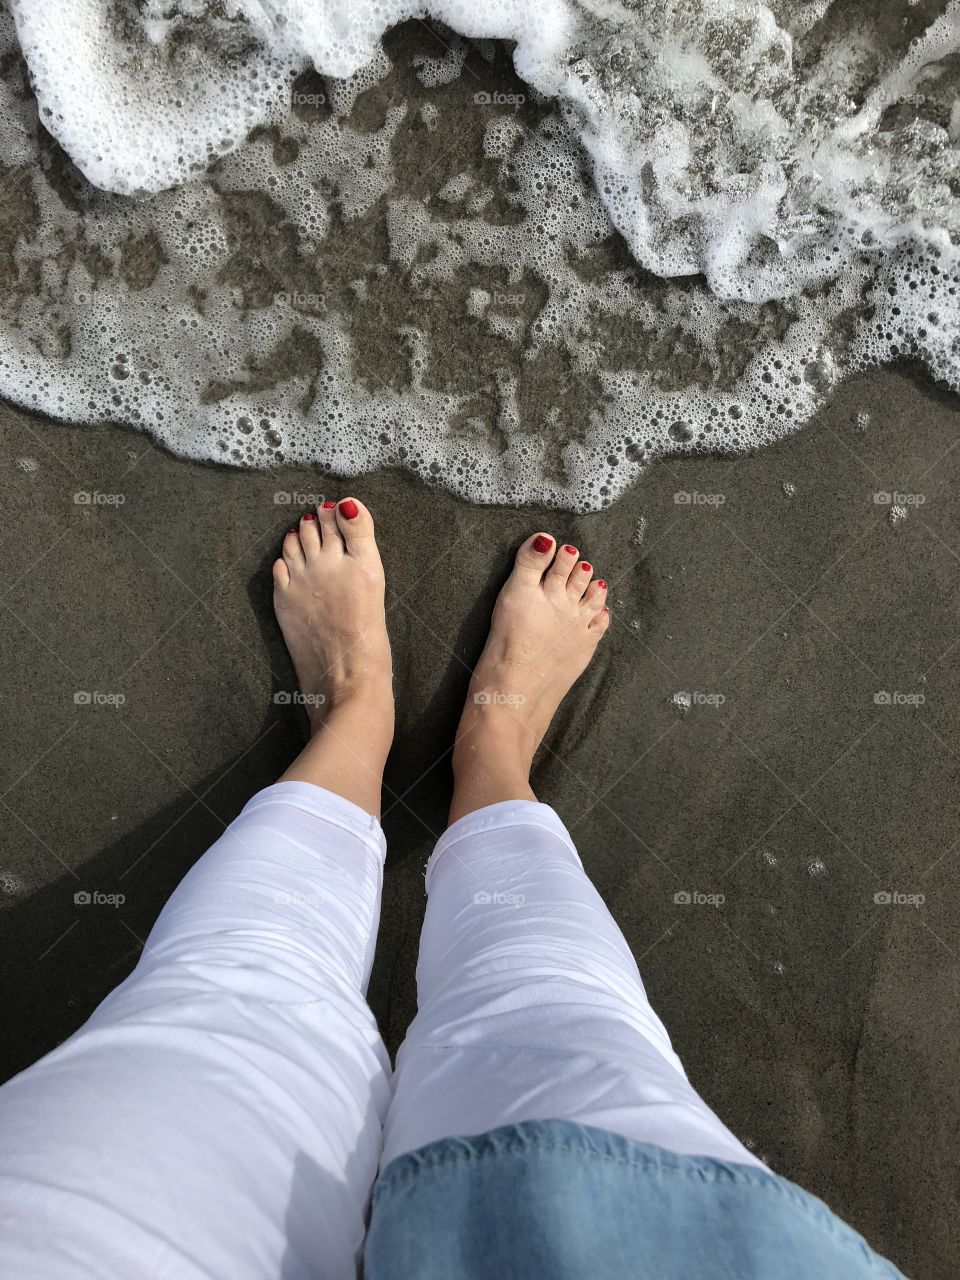 Feet’s in the sand